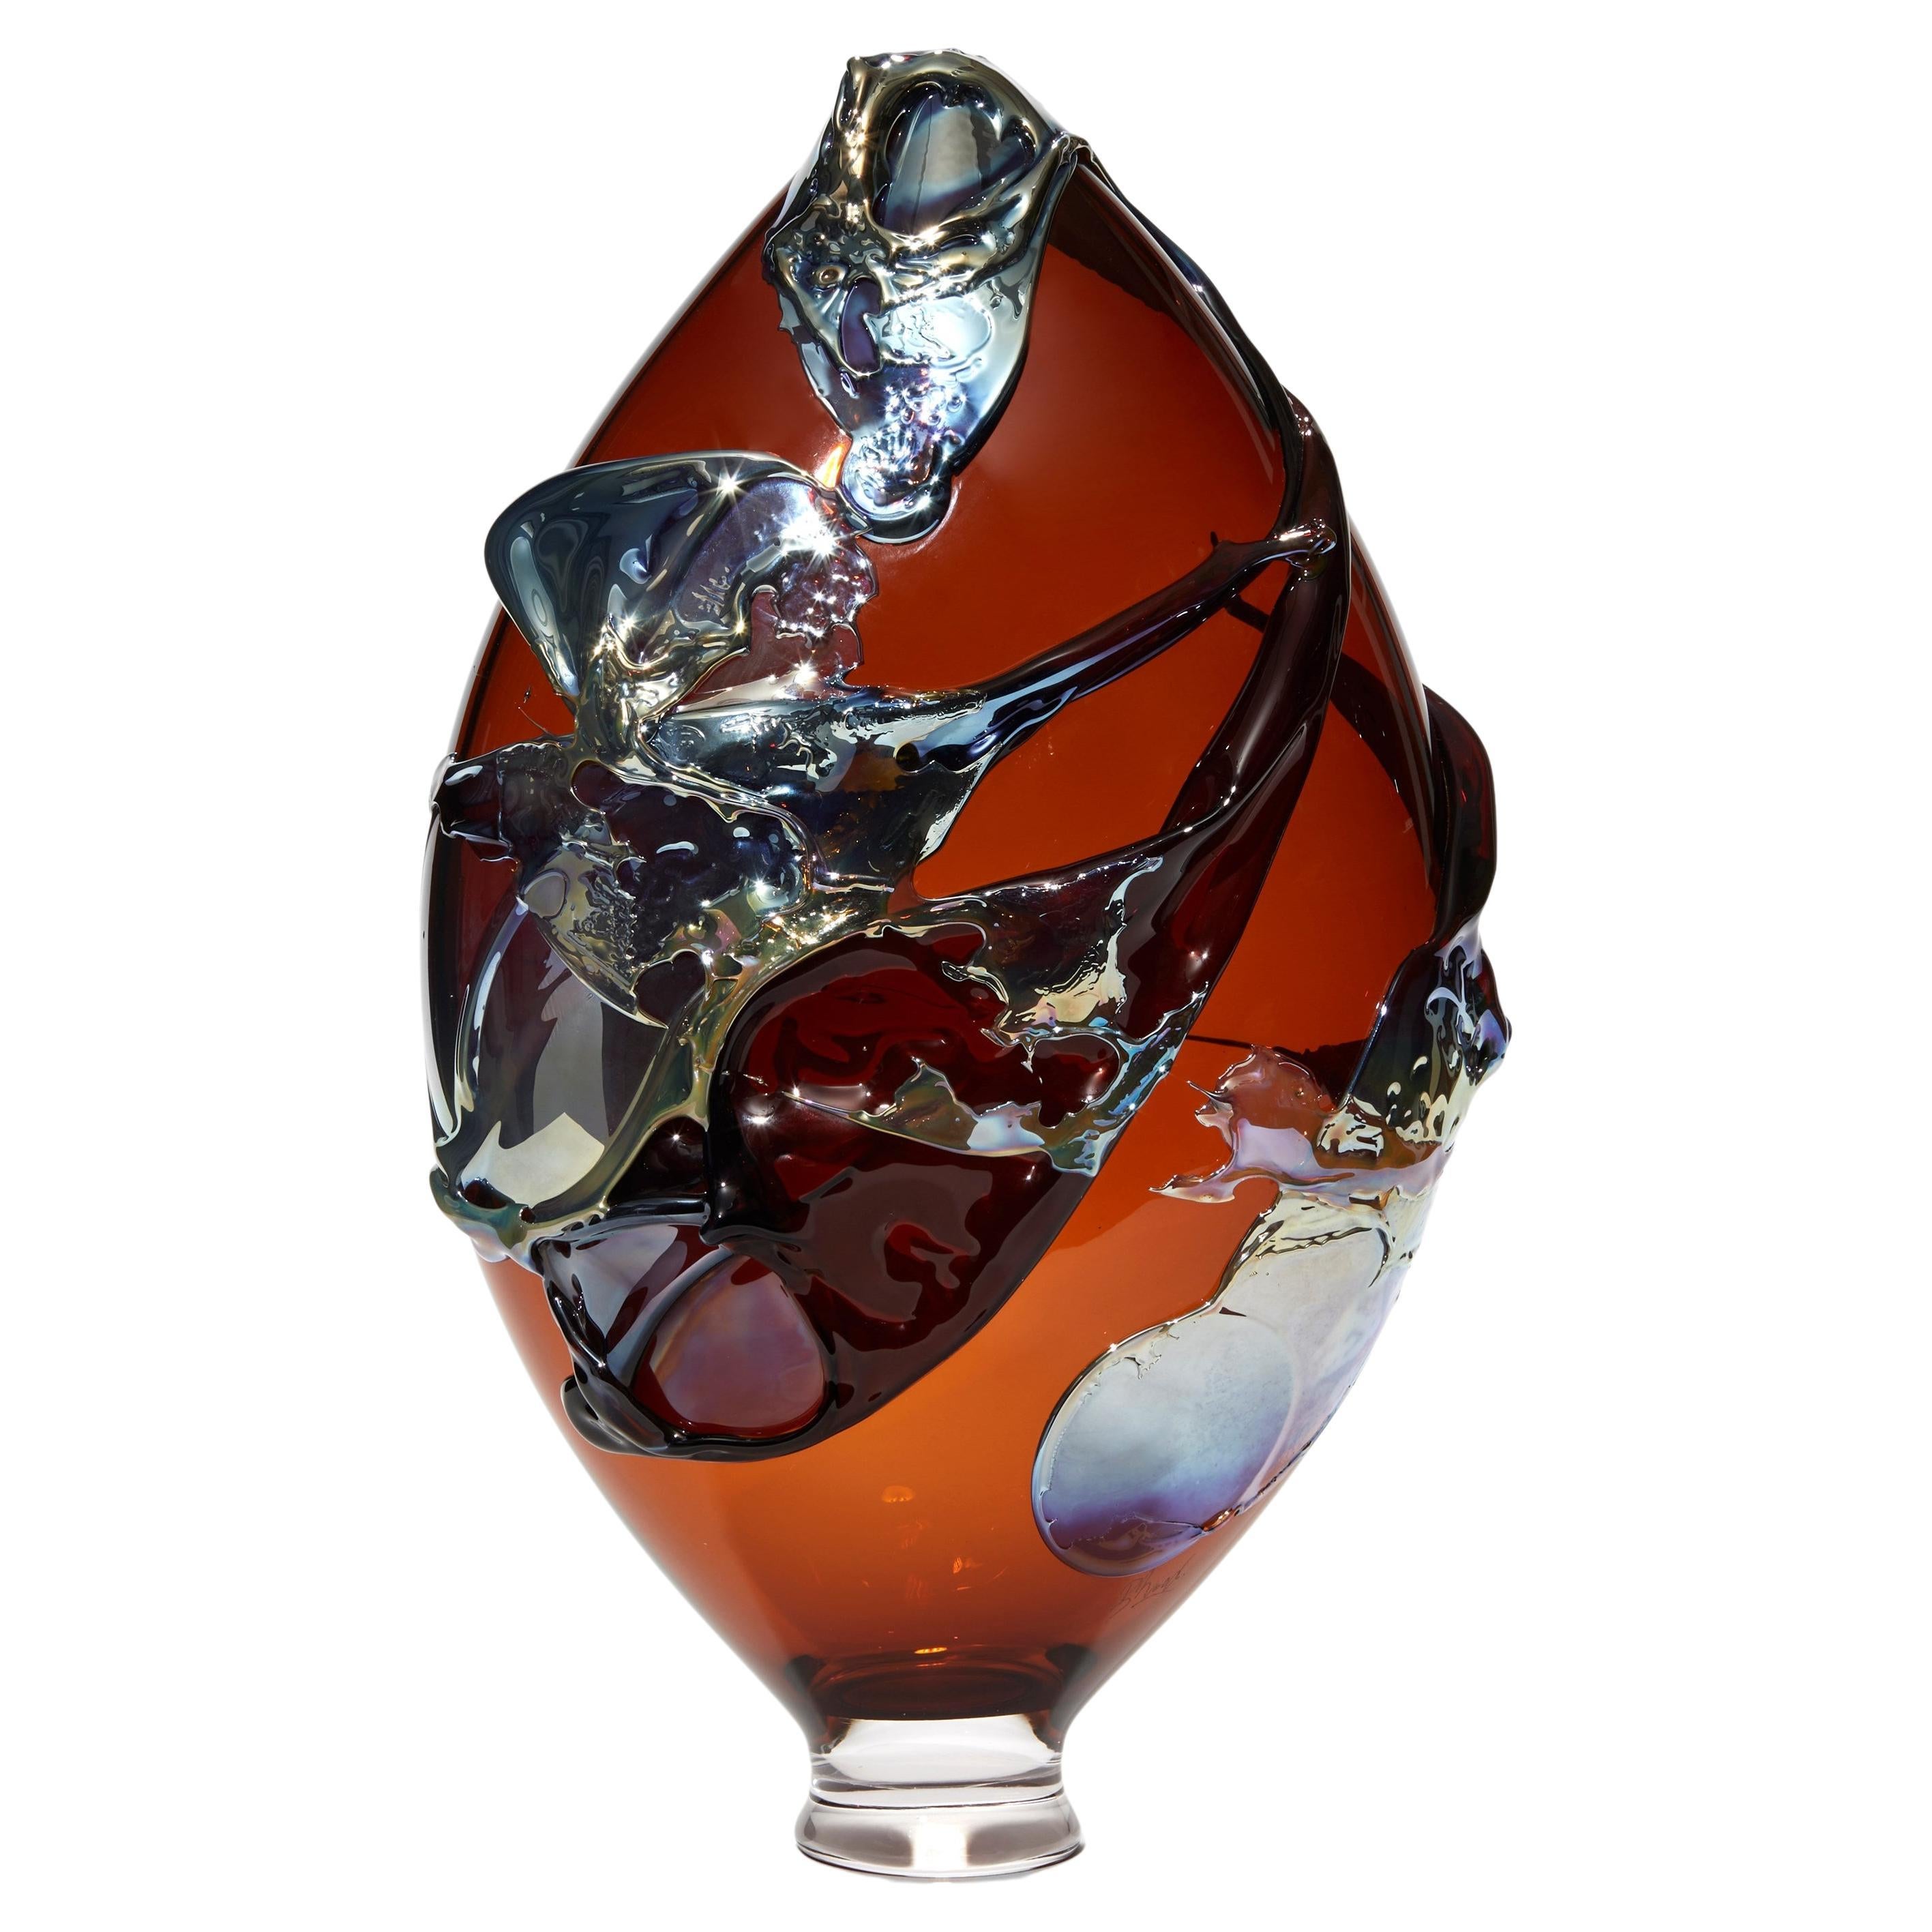 Sap, a Unique Rich Amber & Petrol Metallic Blue Glass Sculpture by Bethany Wood For Sale